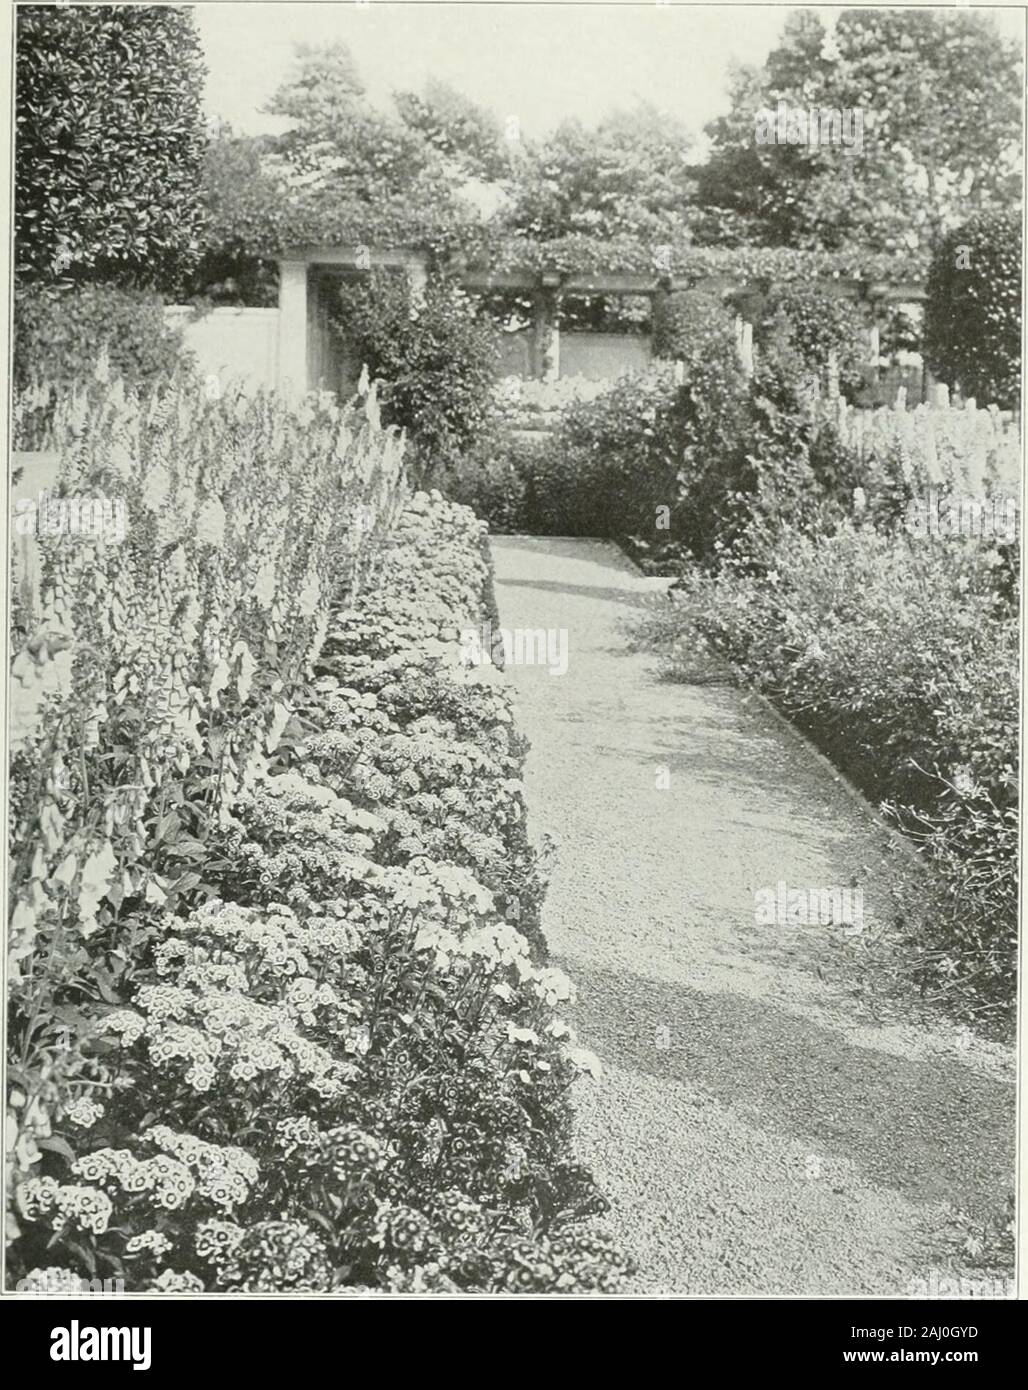 Beautiful gardens in America . rrom 11 pliolo^raph hy TllotniJS Marr anl Son Weld, Brookline, Mass. Mrs. Larz Anderson PLATE 13. From a pfu/tograpk by Thomas Marr and Son Weld, Brookline, Mass. Mrs. Larz Anderson PLATE 14 Stock Photo